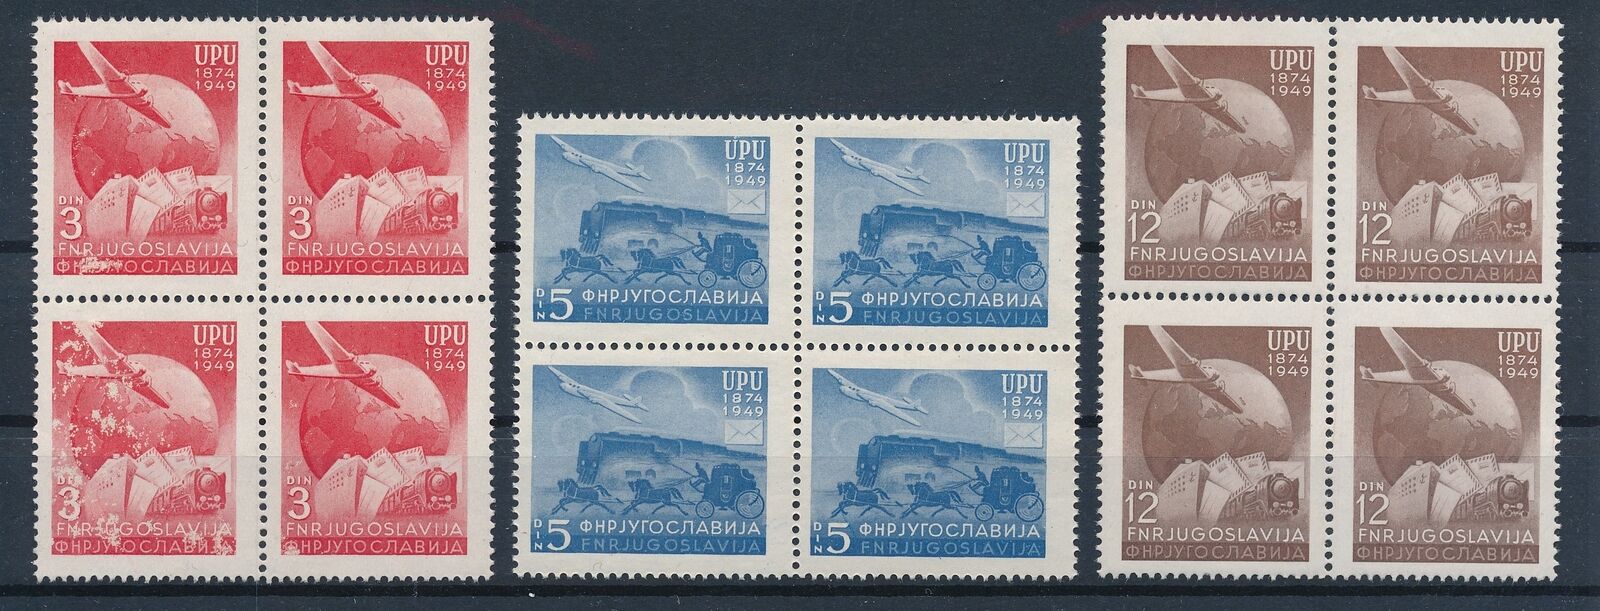 [pg10236] Yougoslavia 1949 Upu Good Set In Blocks Of 4 Stamps Very Fine Mnh